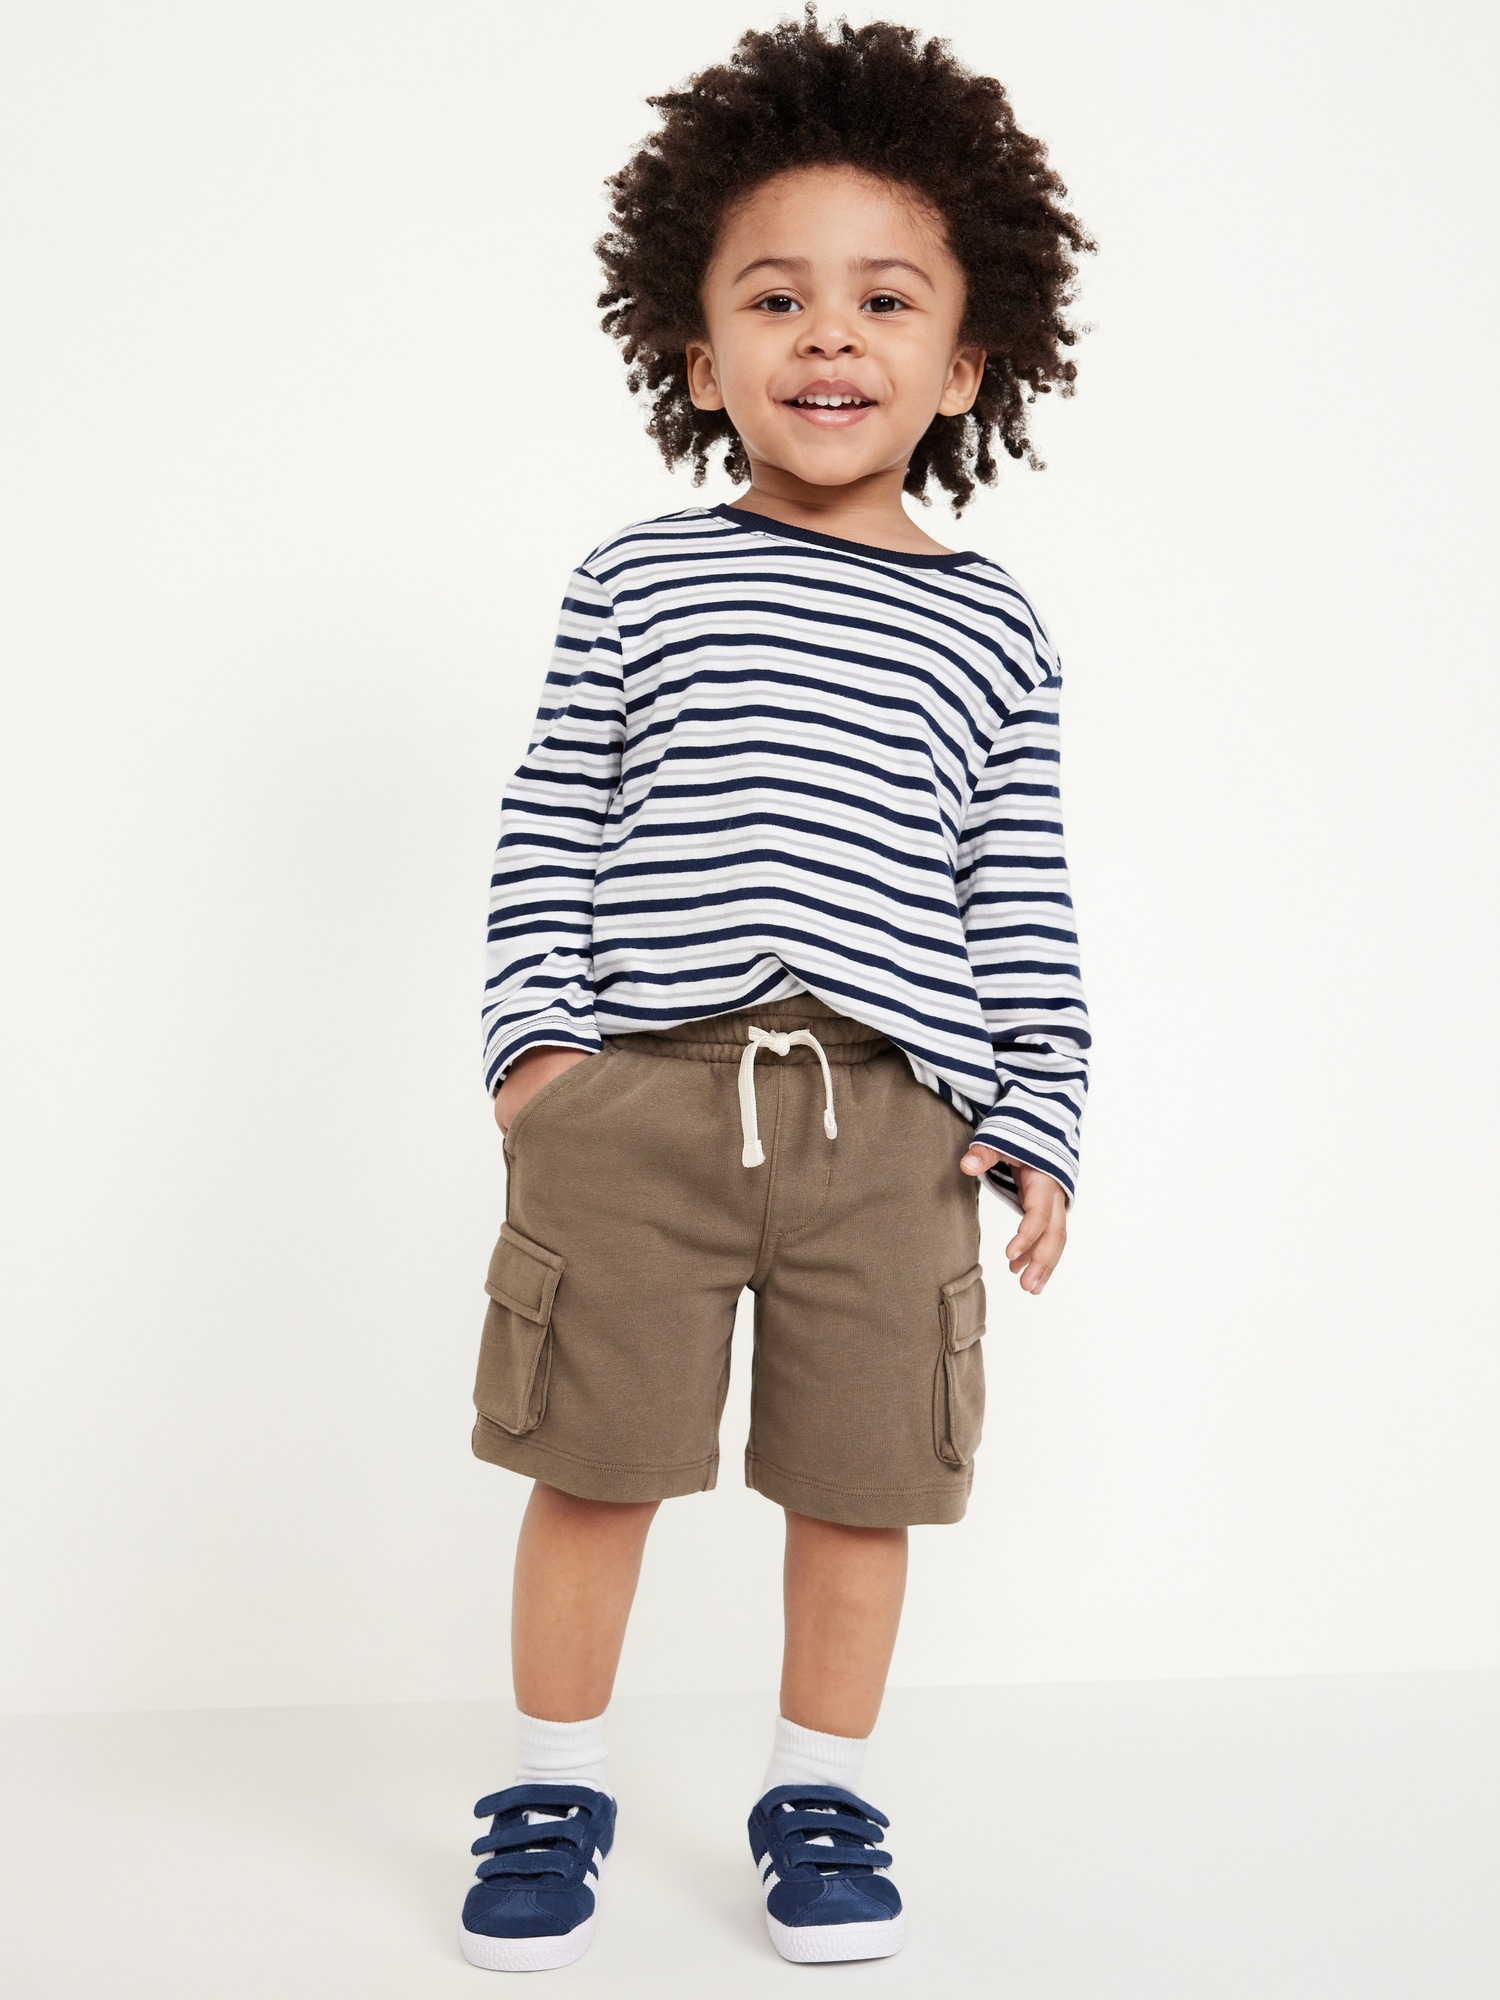 Functional-Drawstring Pull-On Shorts for Toddler Boys Hot Deal